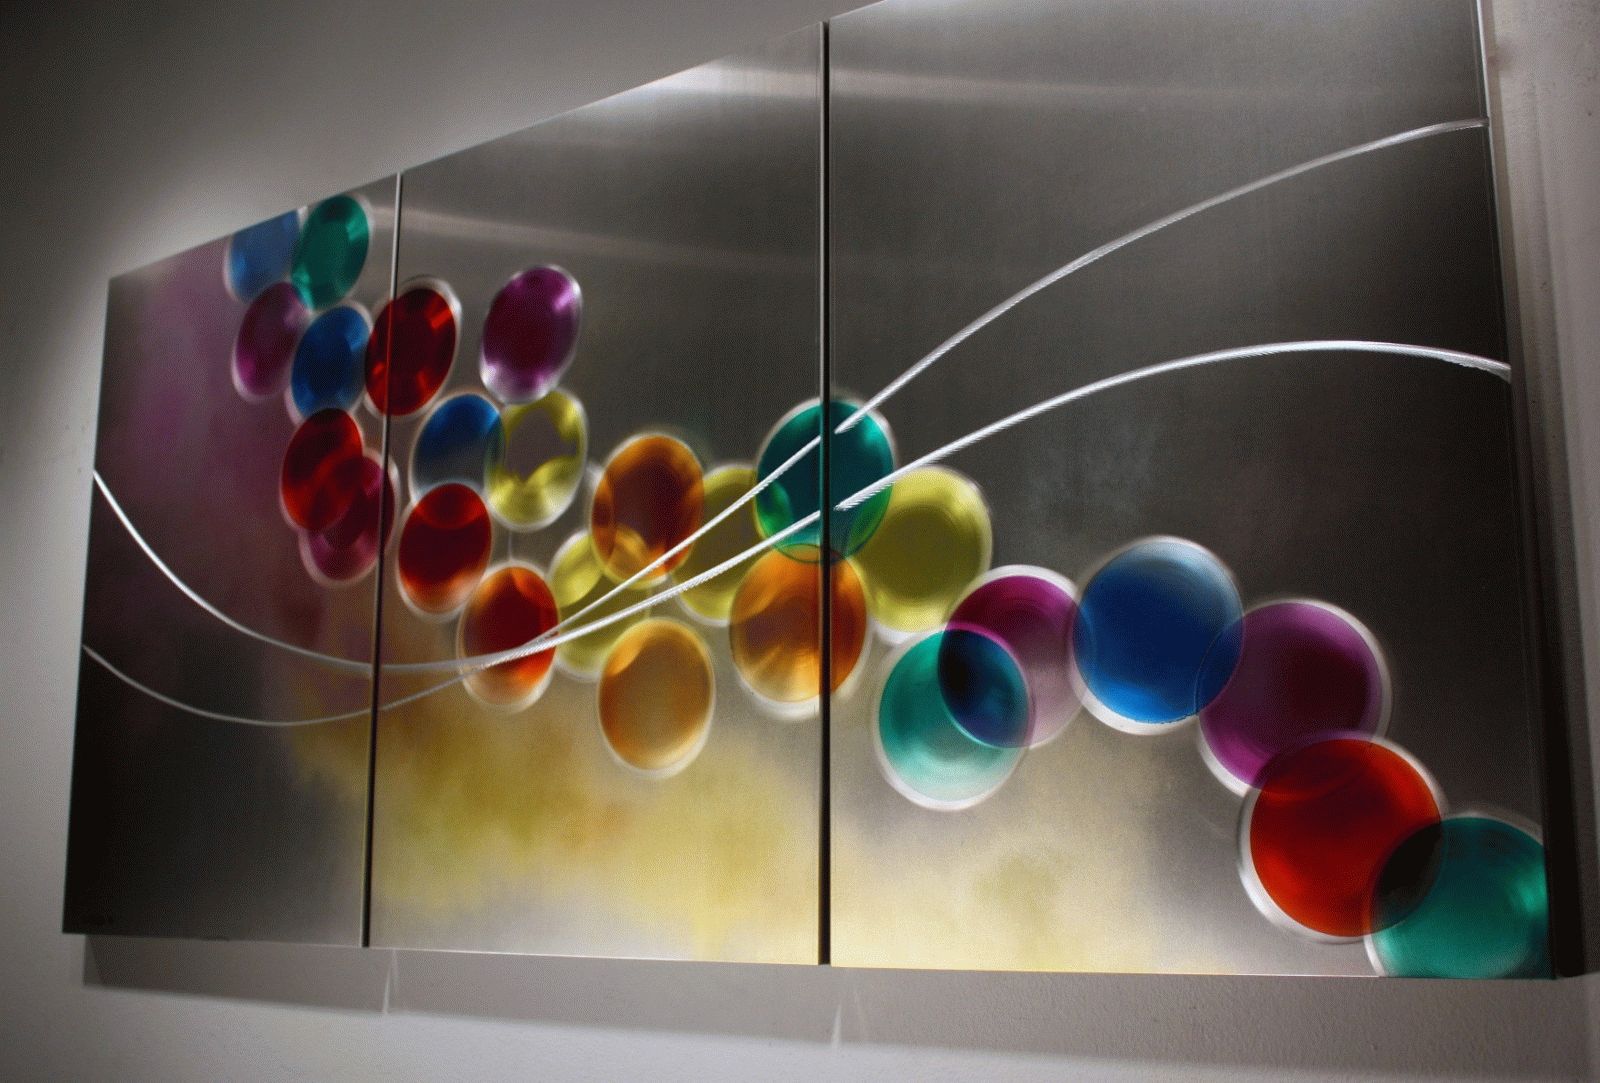 Intricate Metal Abstract Wall Art Together With Sculpture Modern Throughout Most Recent Houzz Abstract Wall Art (View 16 of 20)